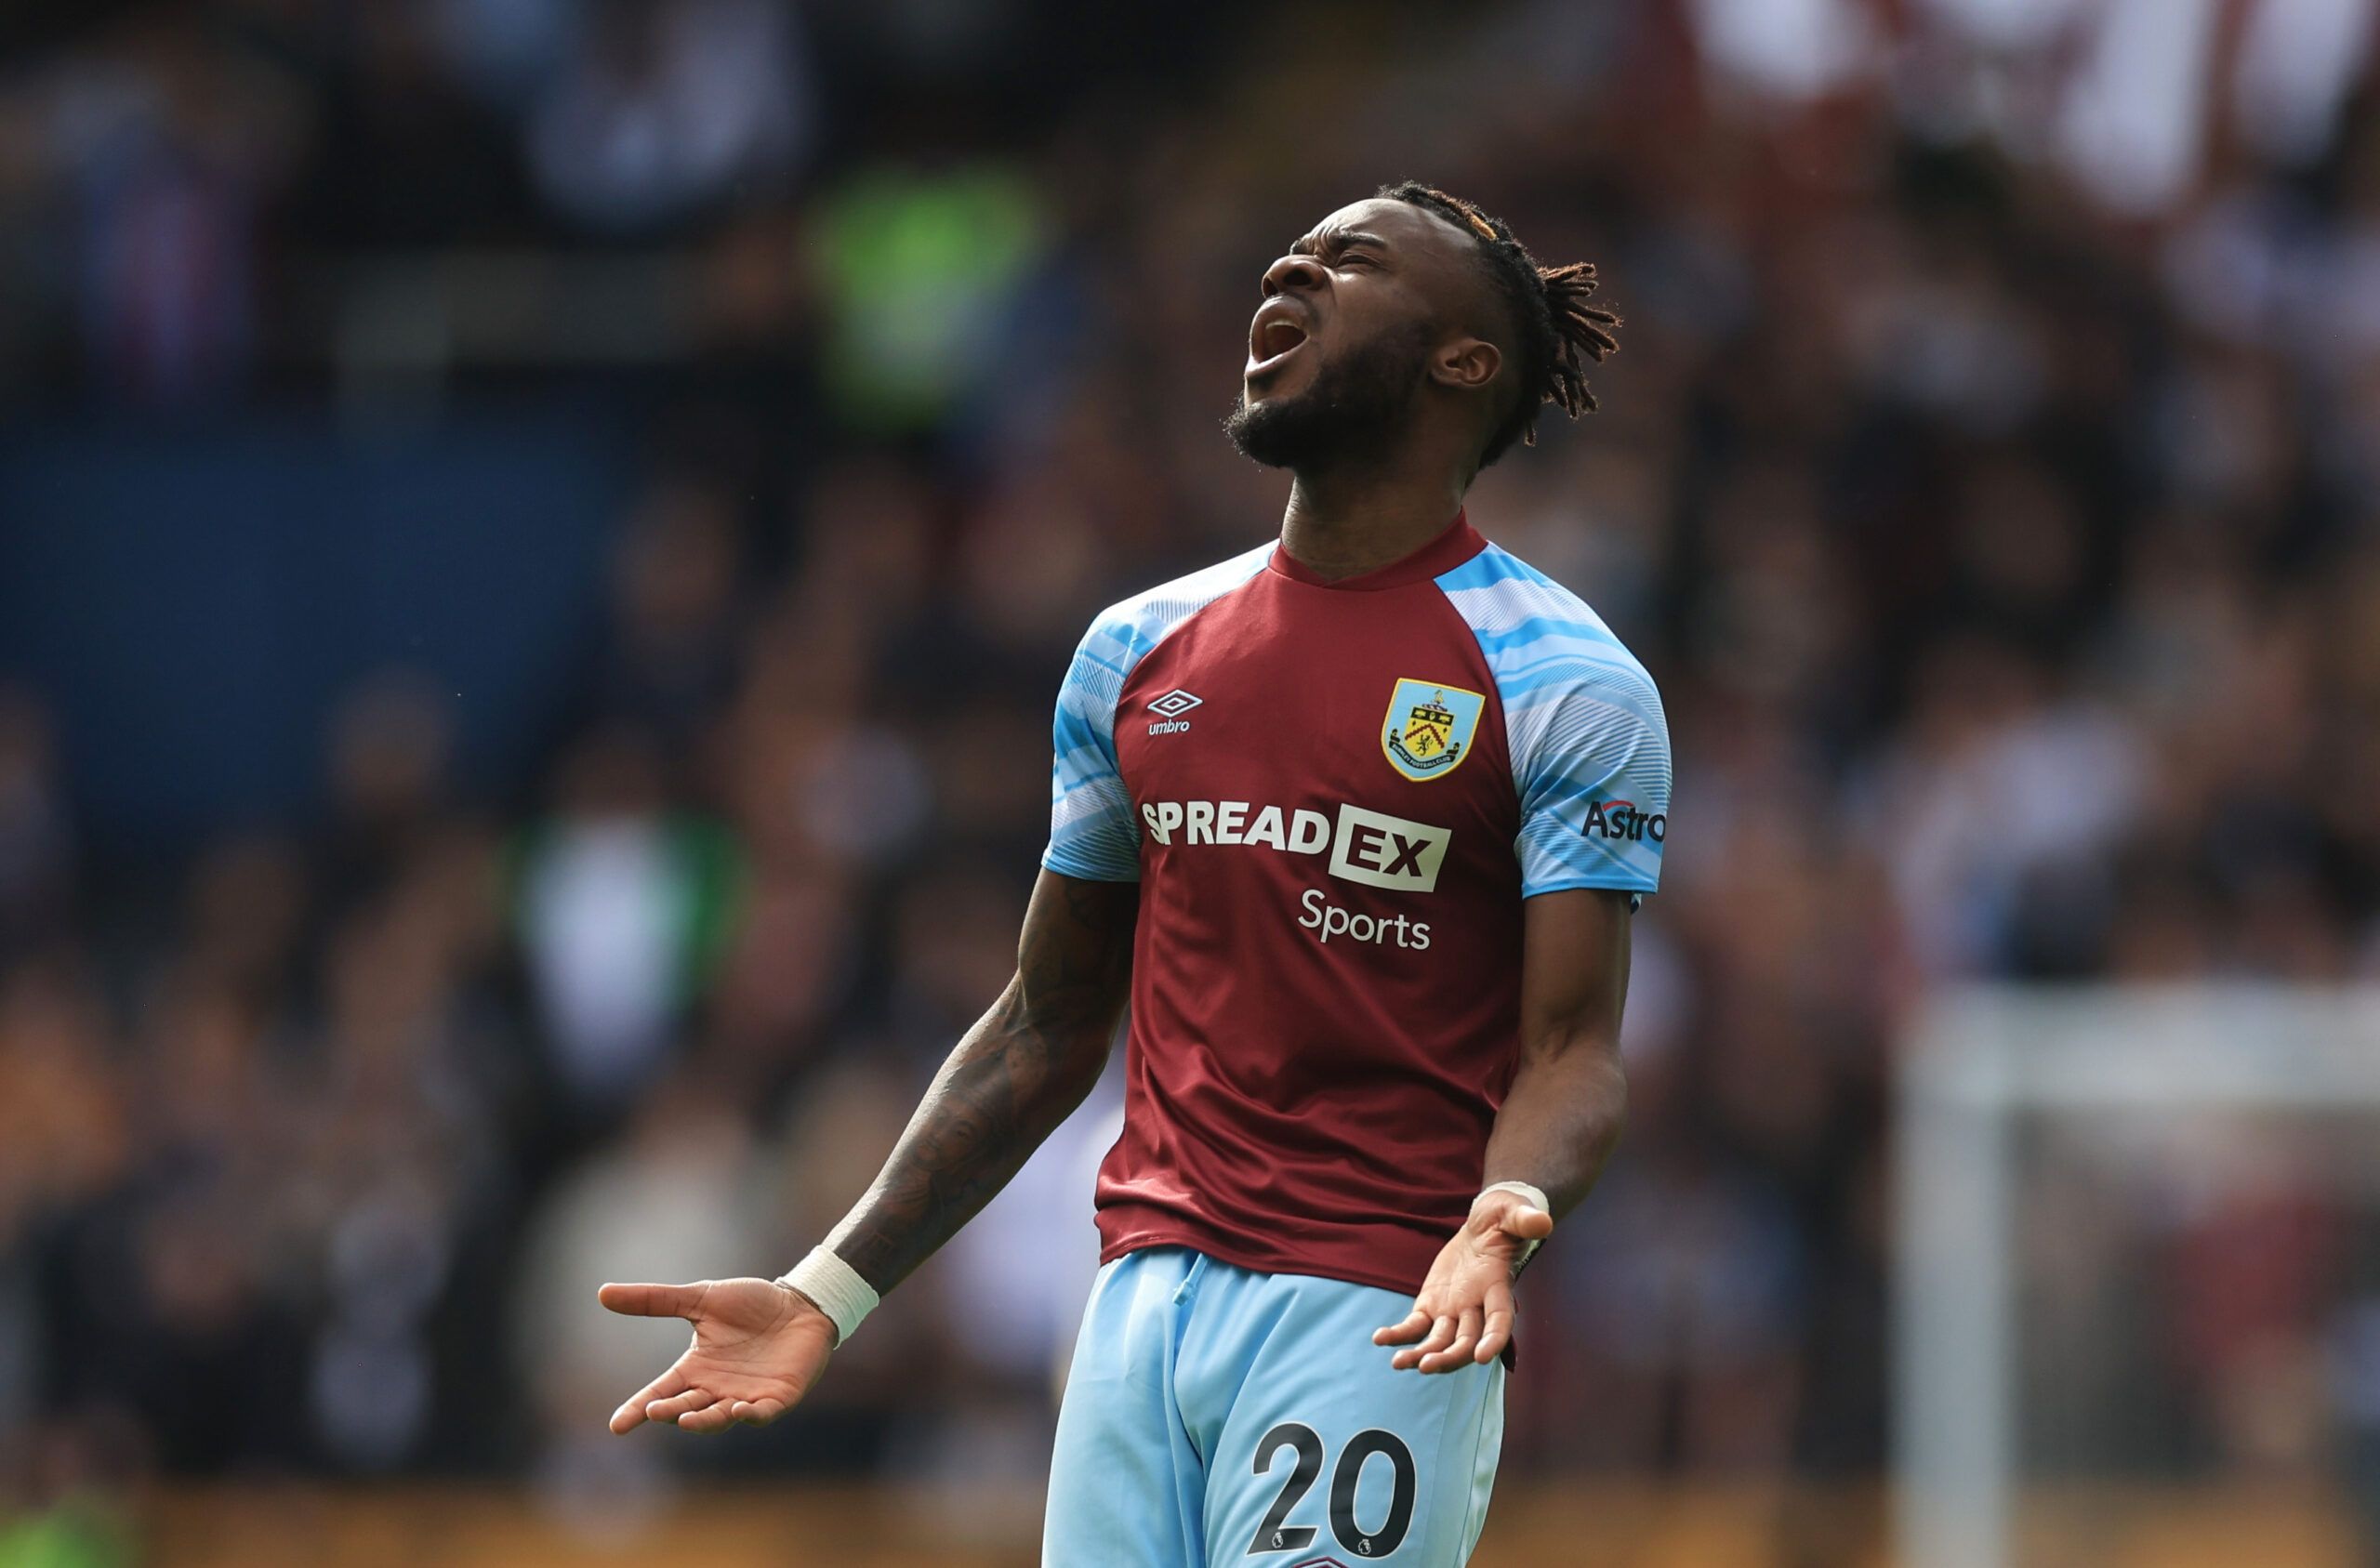 Soccer Football - Premier League - Burnley v Aston Villa - Turf Moor, Burnley, Britain - May 7, 2022 Burnley's Maxwel Cornet reacts Action Images via Reuters/Lee Smith EDITORIAL USE ONLY. No use with unauthorized audio, video, data, fixture lists, club/league logos or 'live' services. Online in-match use limited to 75 images, no video emulation. No use in betting, games or single club /league/player publications.  Please contact your account representative for further details.